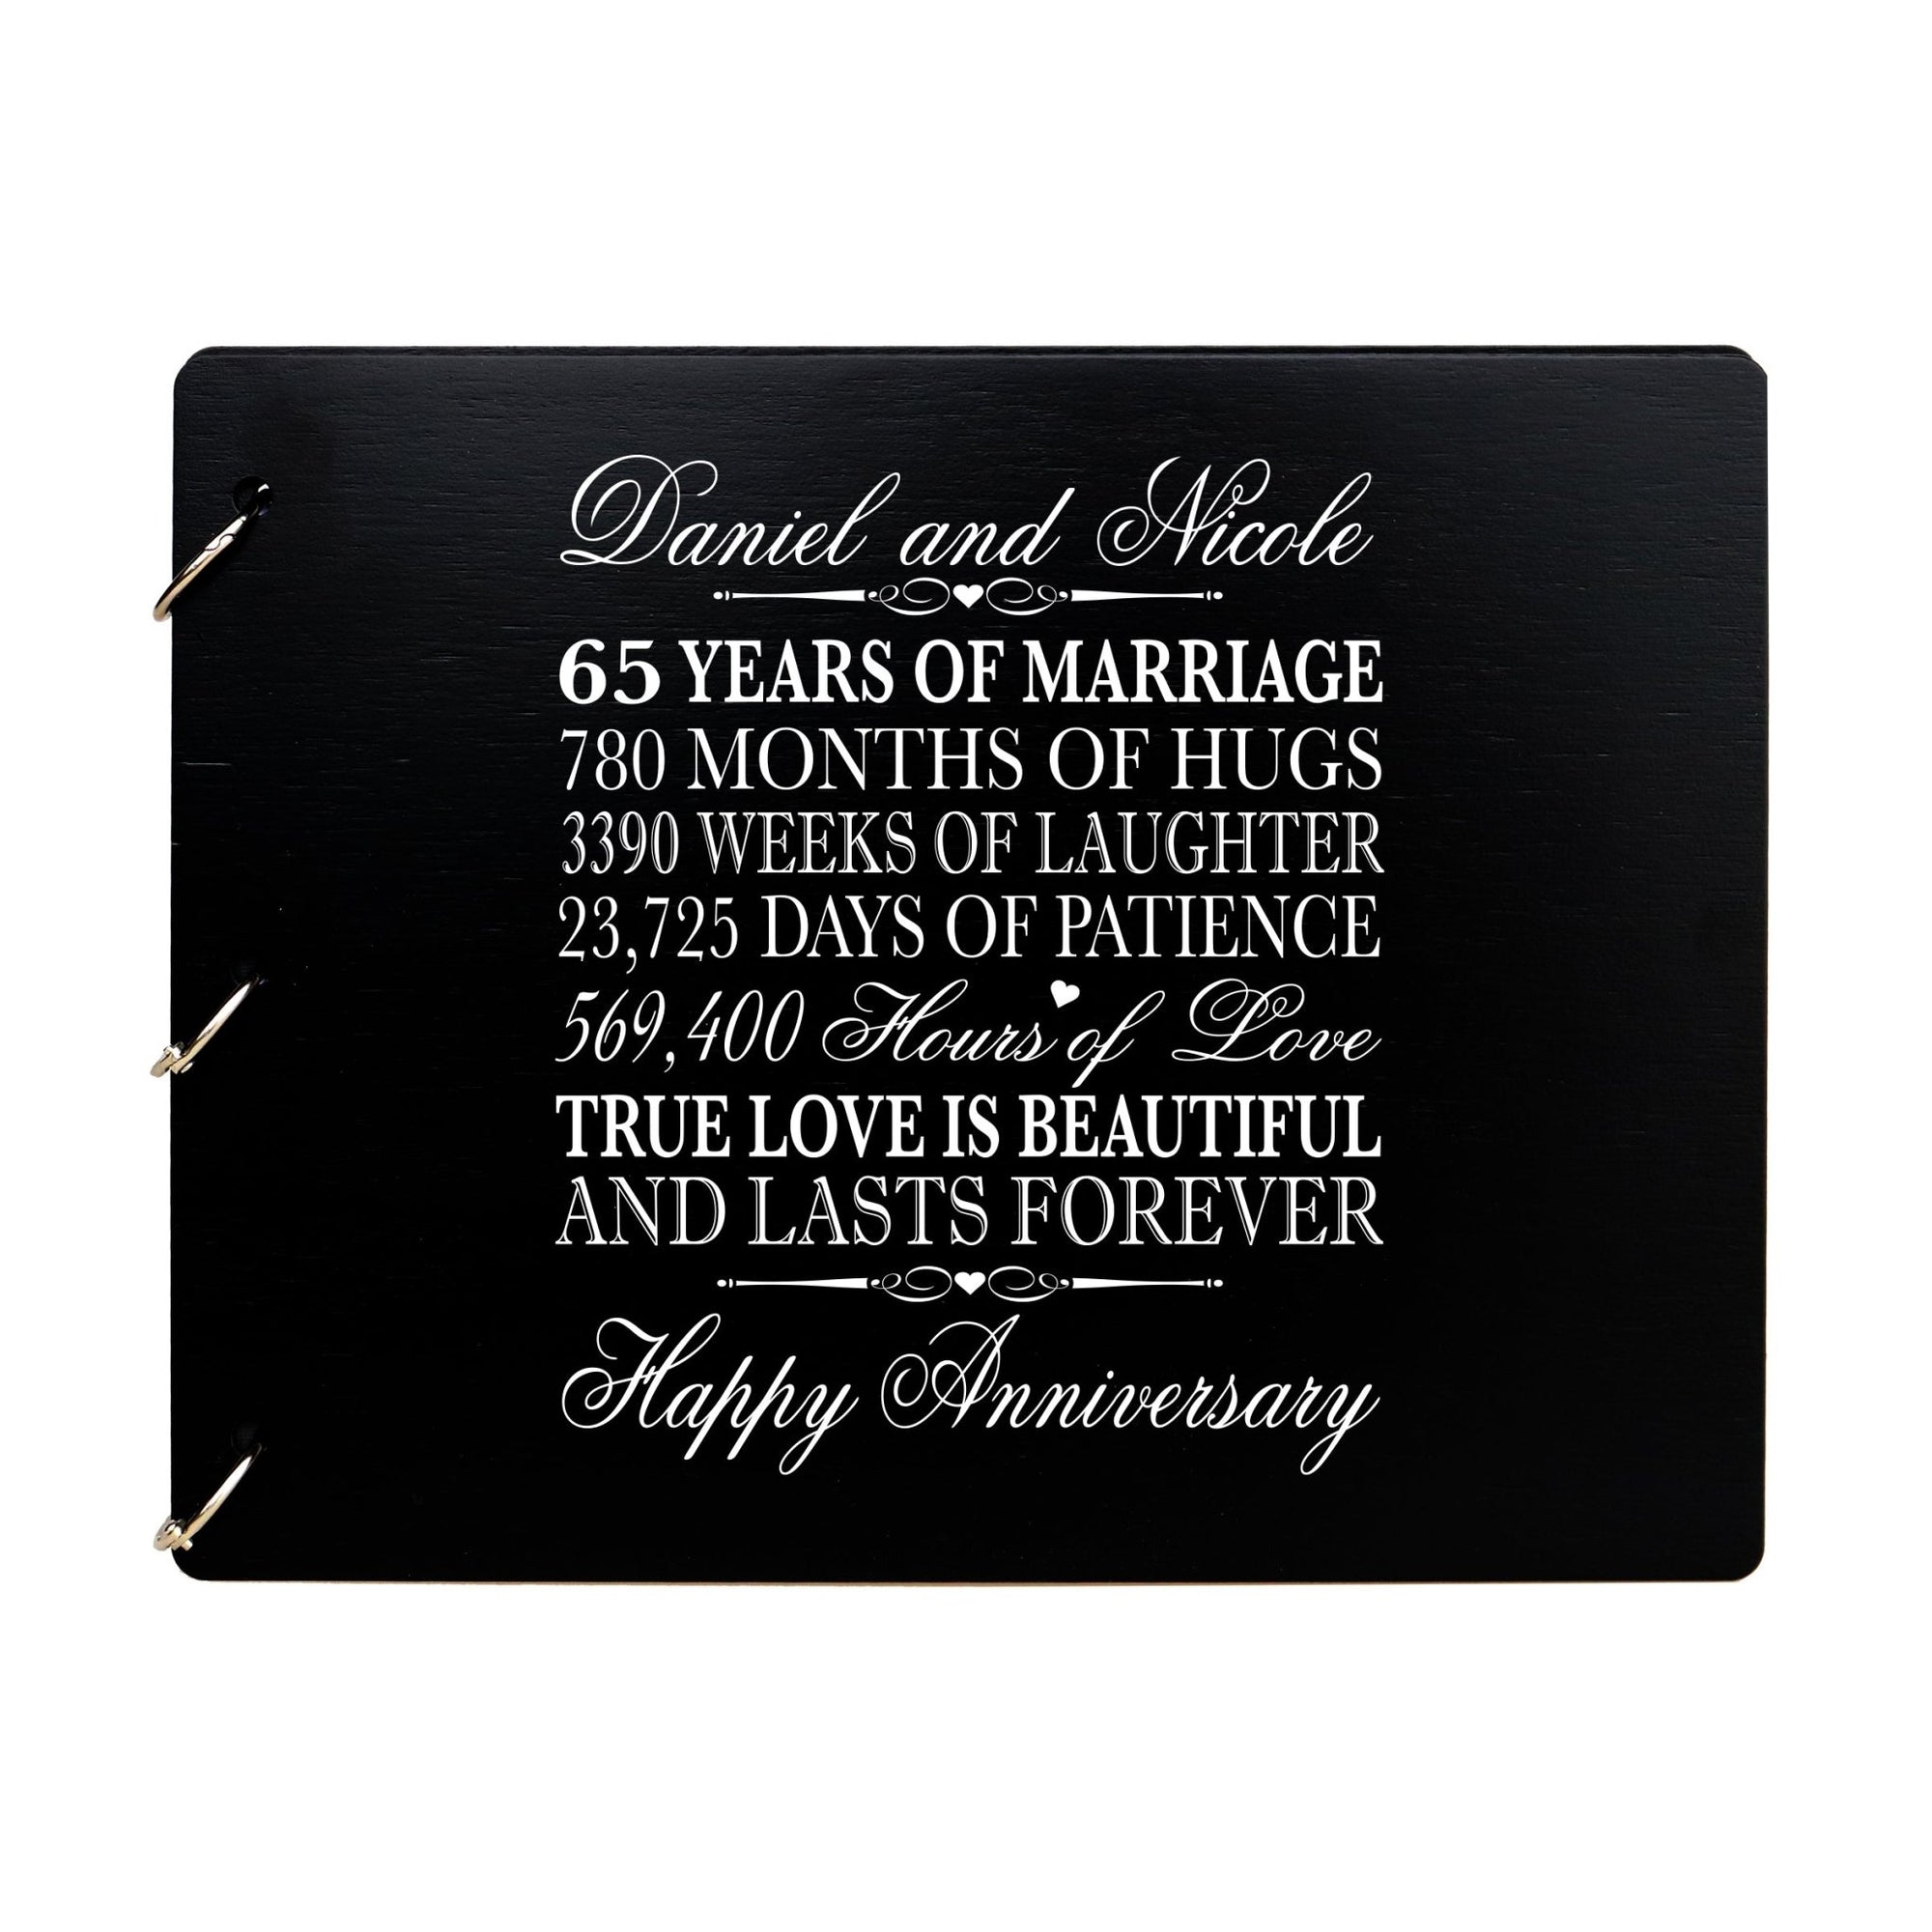 Personalized Guest Book Sign for 65th Wedding Anniversary - True Love Is Beautiful - LifeSong Milestones